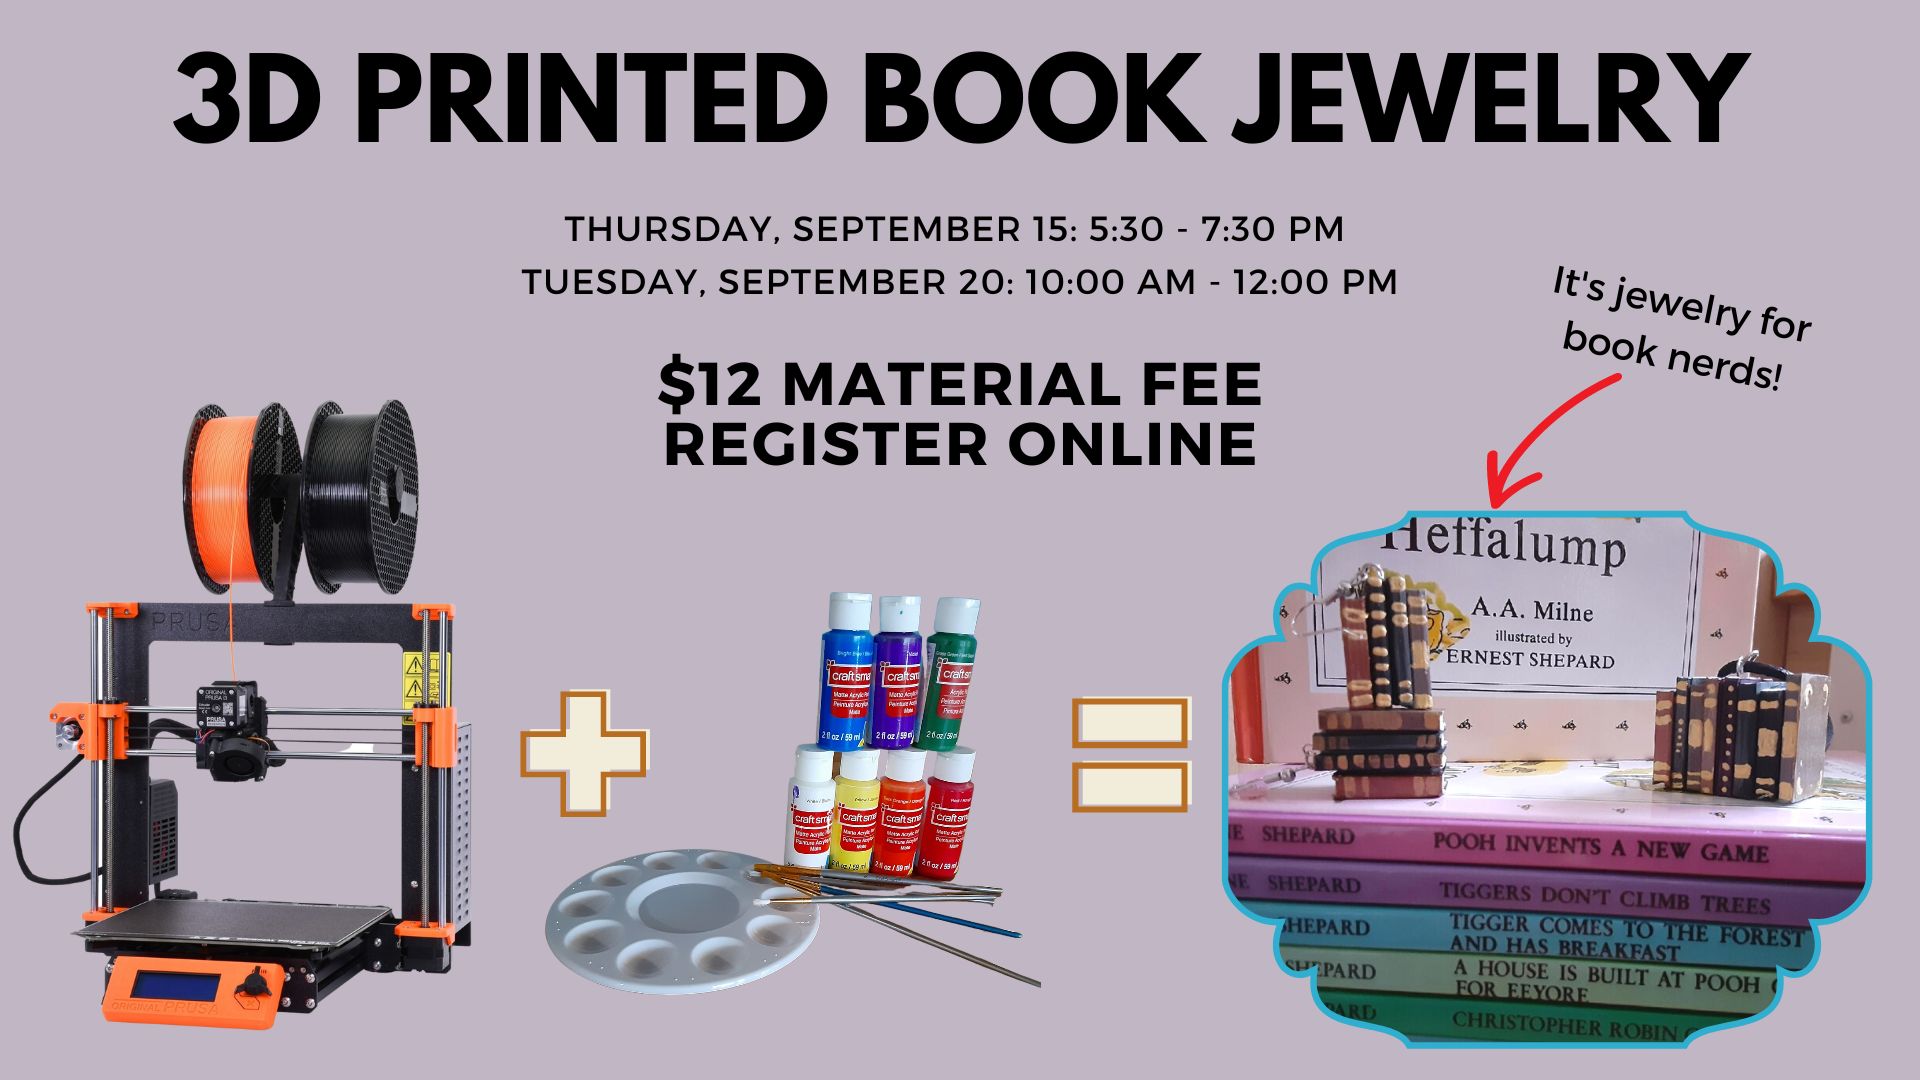 Flyer for 3D Printed Book Jewelry class in The Forge